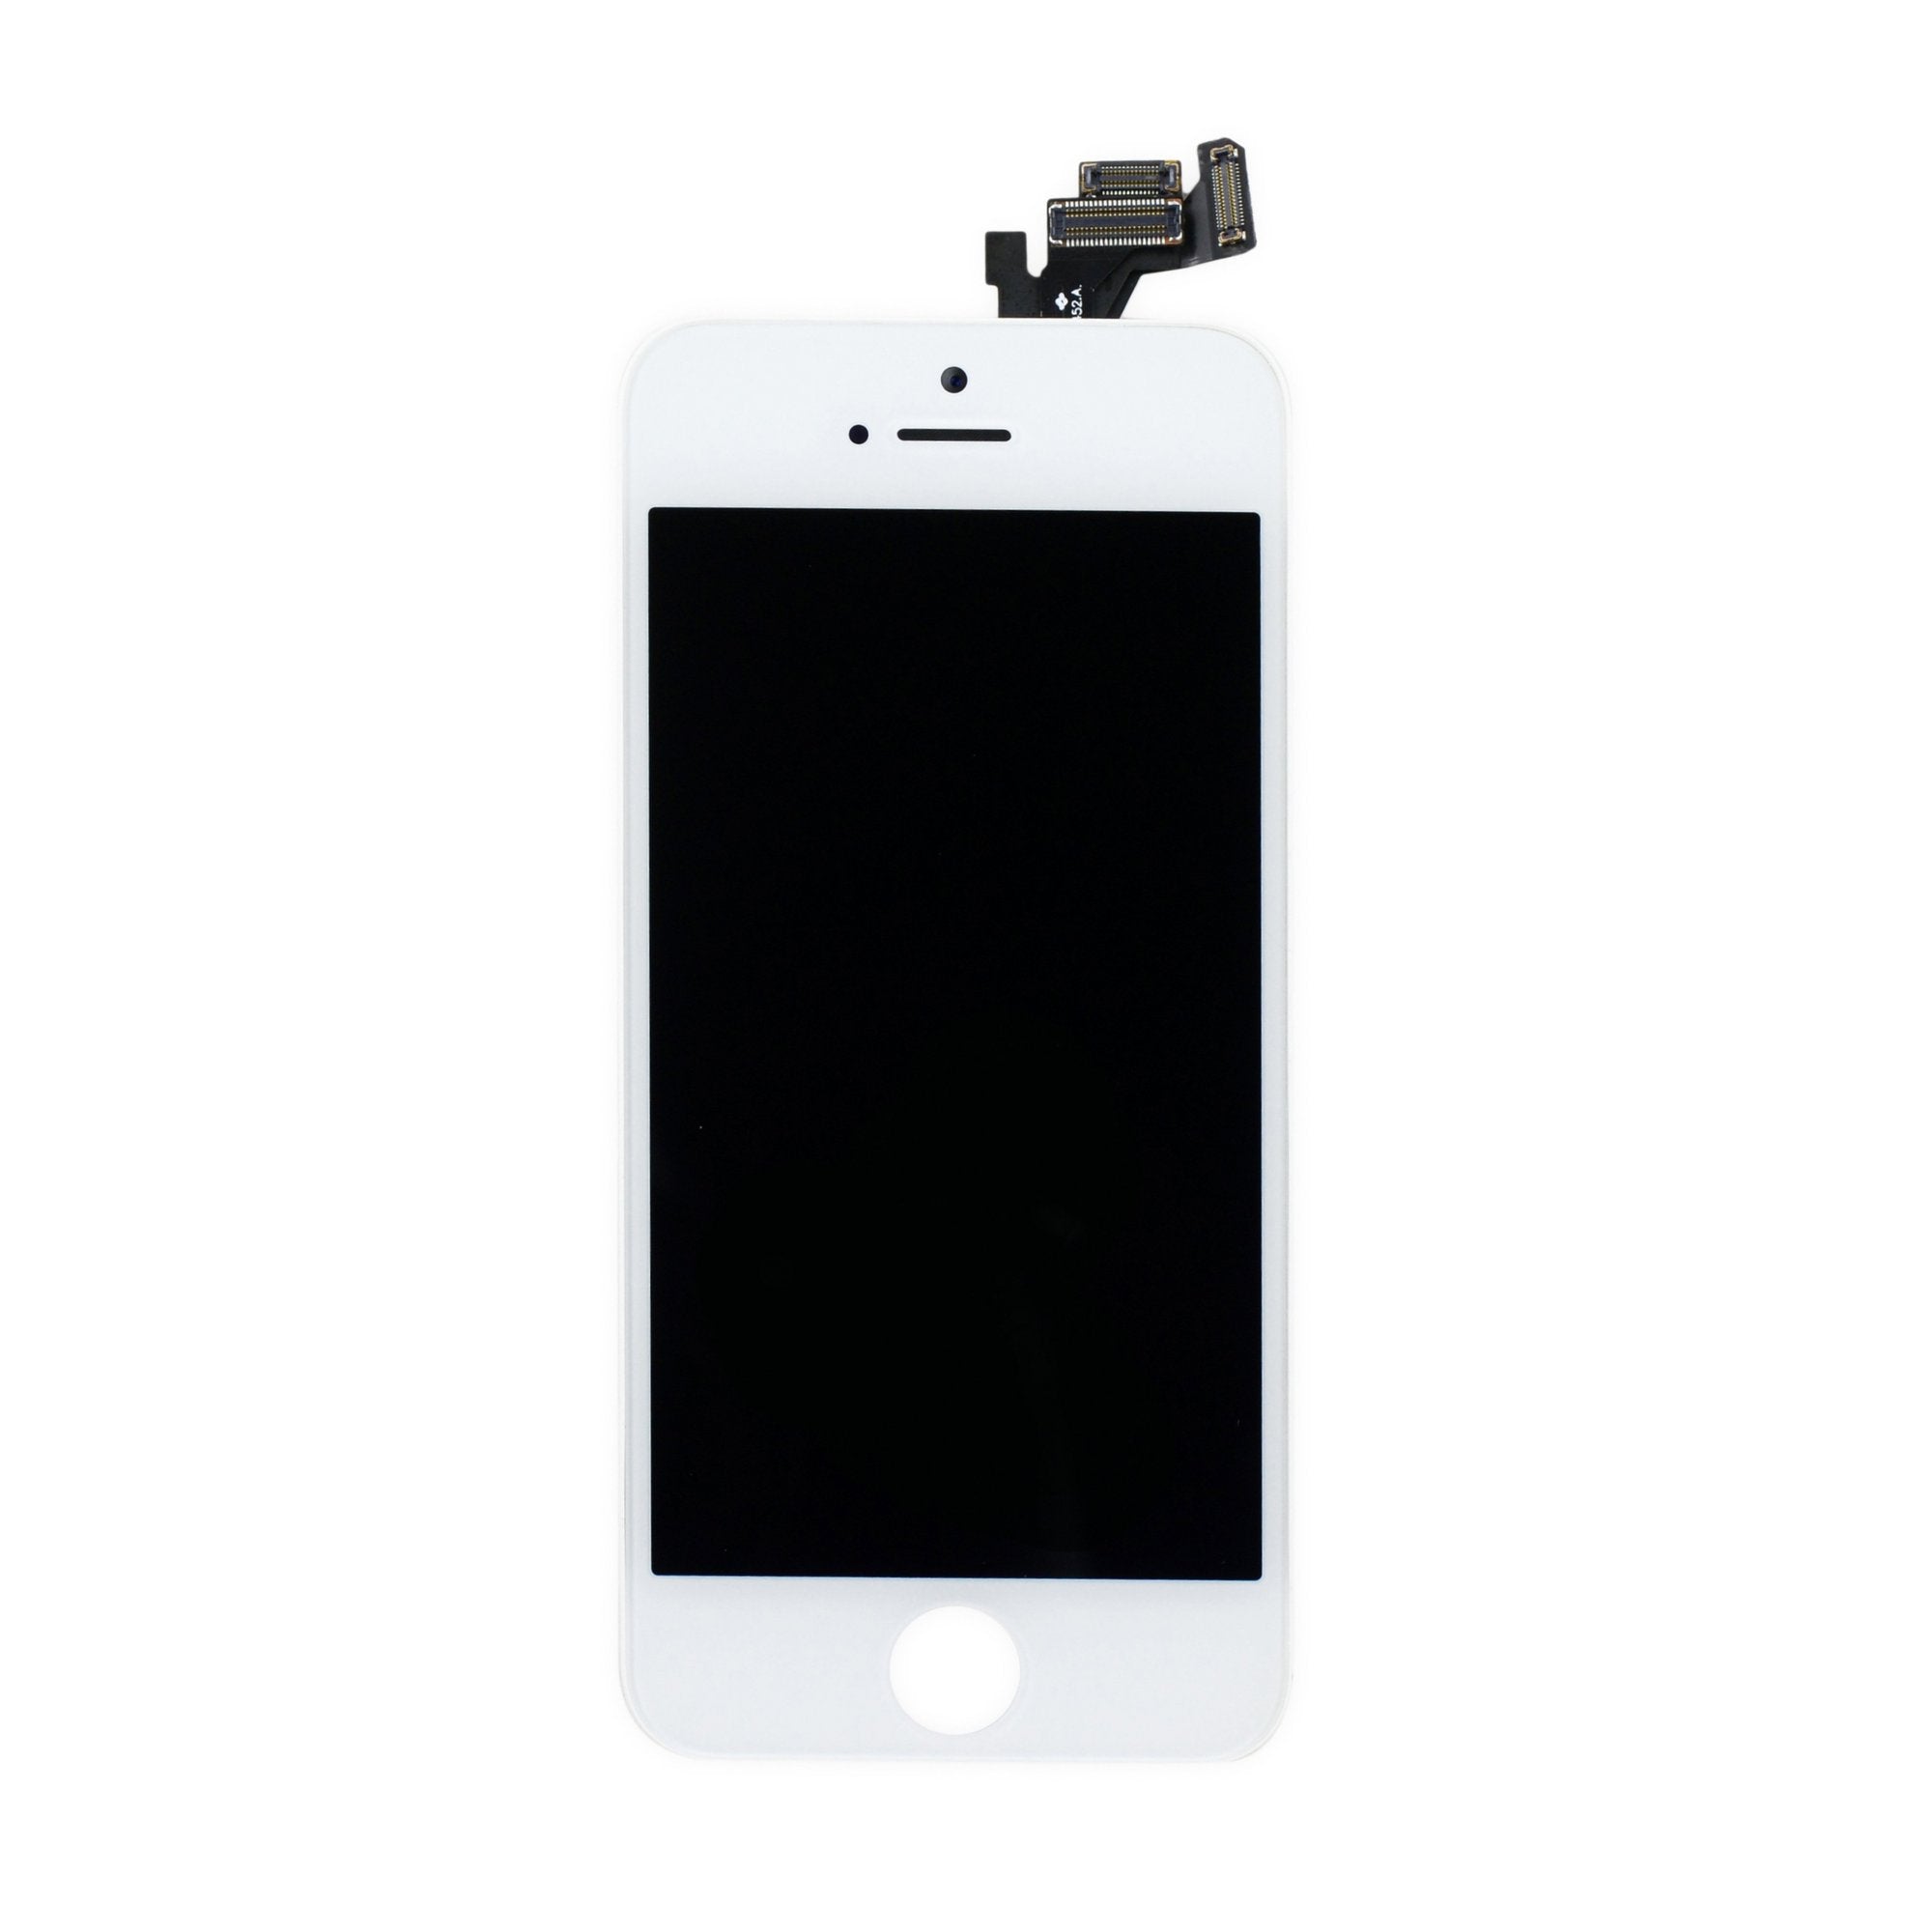 iPhone 5 Screen White New Part Only